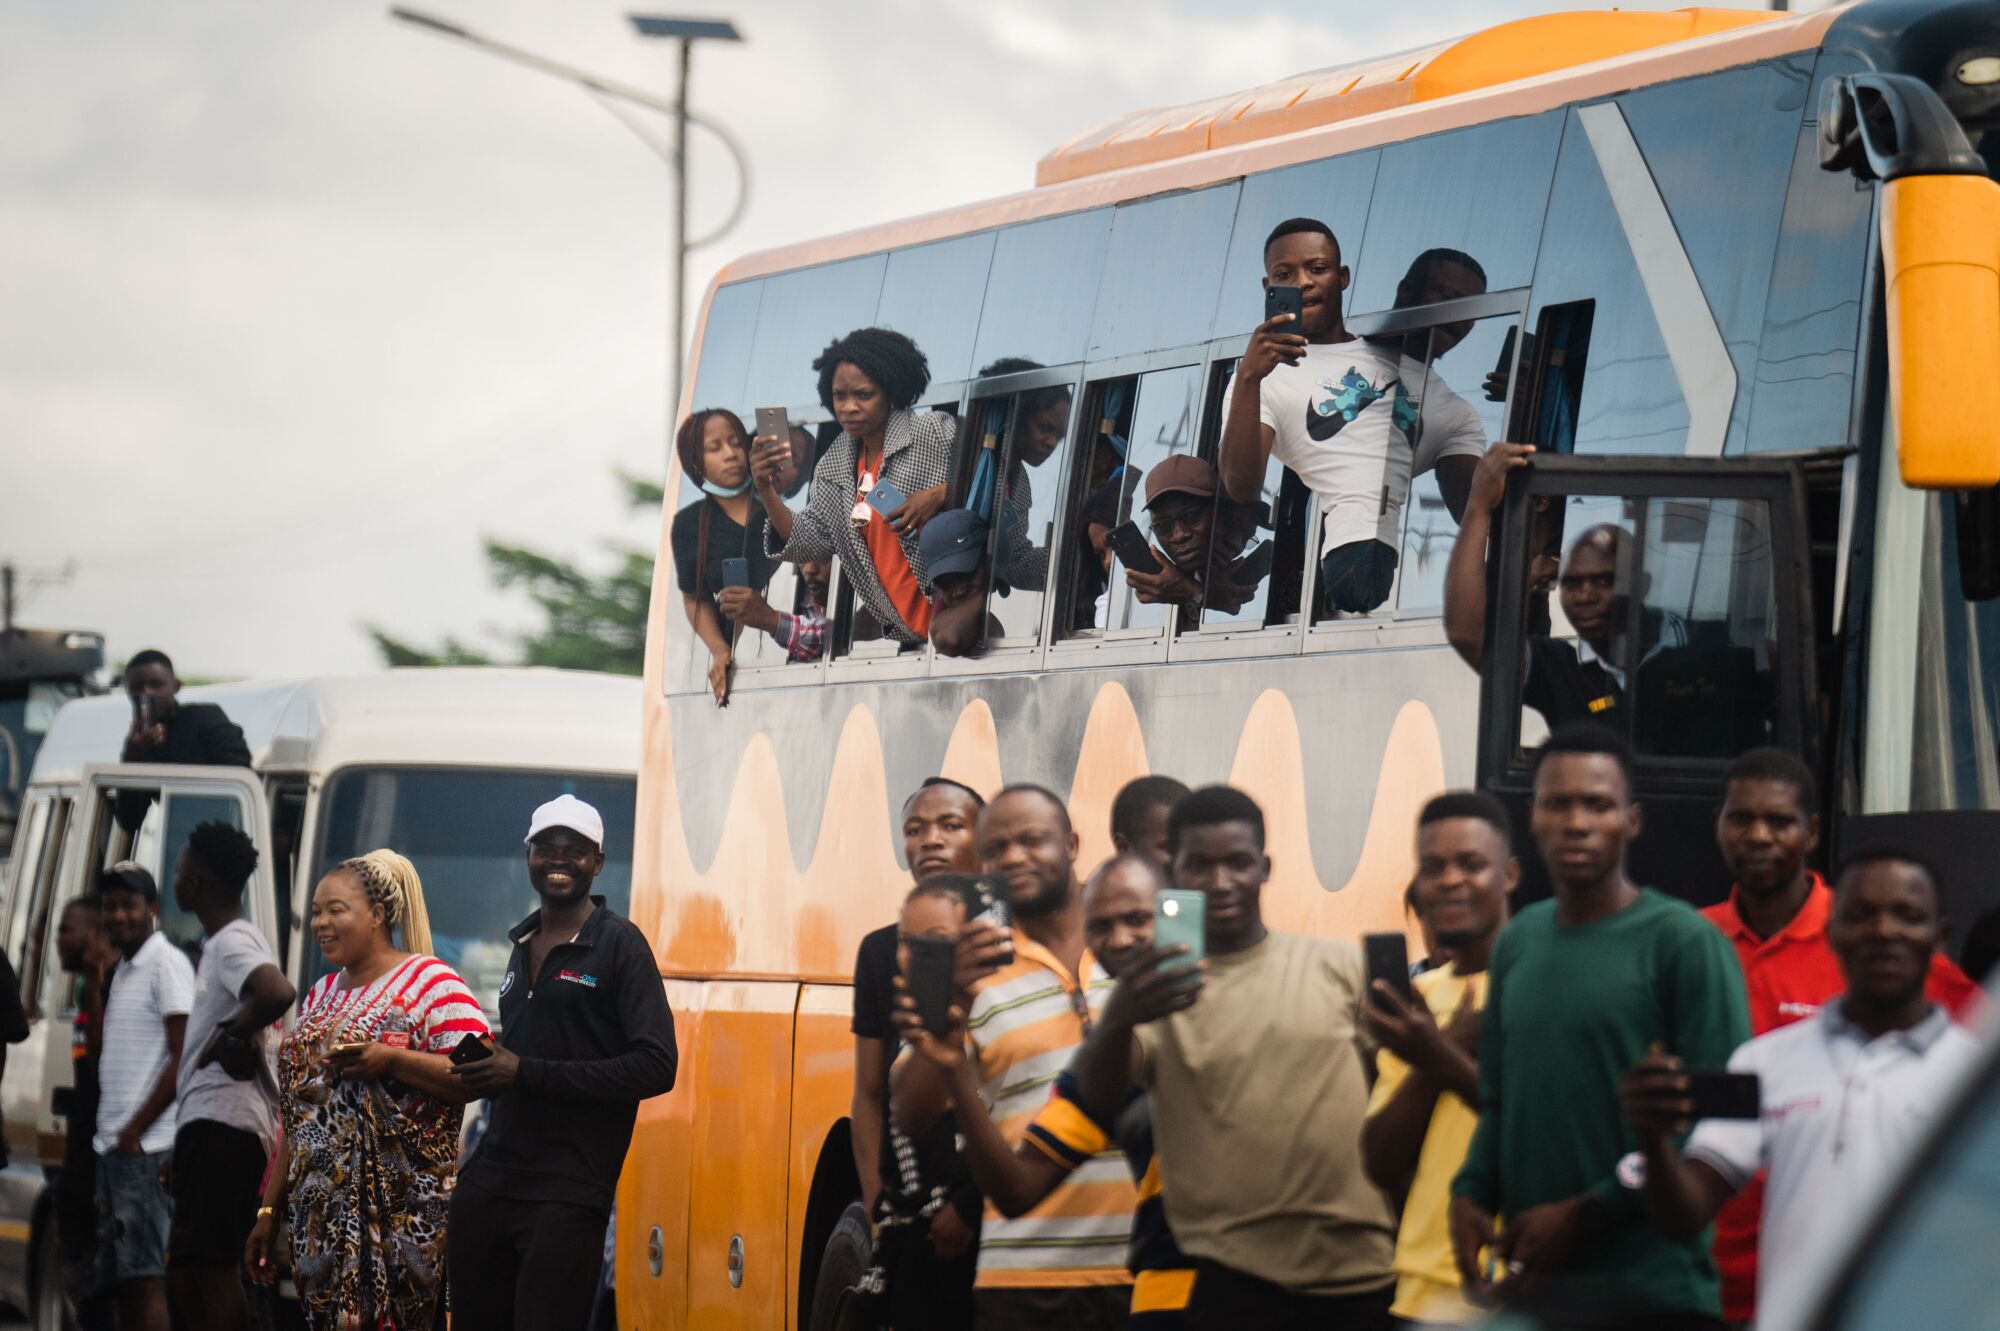 People line the streets and take photographs of U.S. Vice President Kamala Harris' motorcade in Zambia.